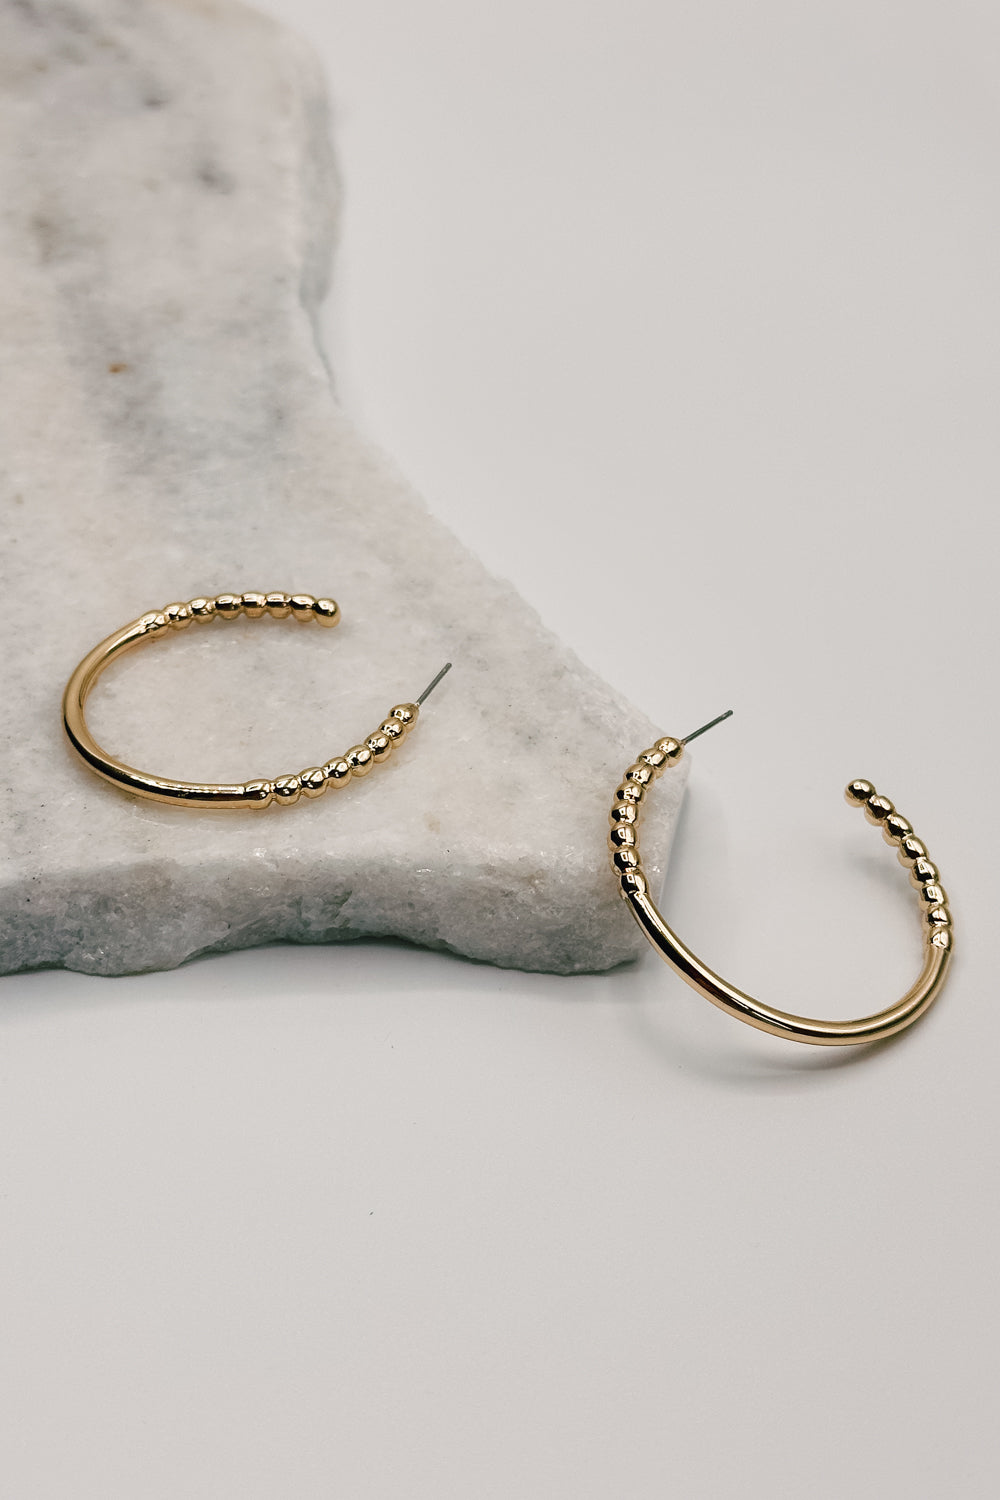 Close up view of the Alaina Gold Dipped Bead Hoop Earring. the earring features gold dipped half beaded hoops